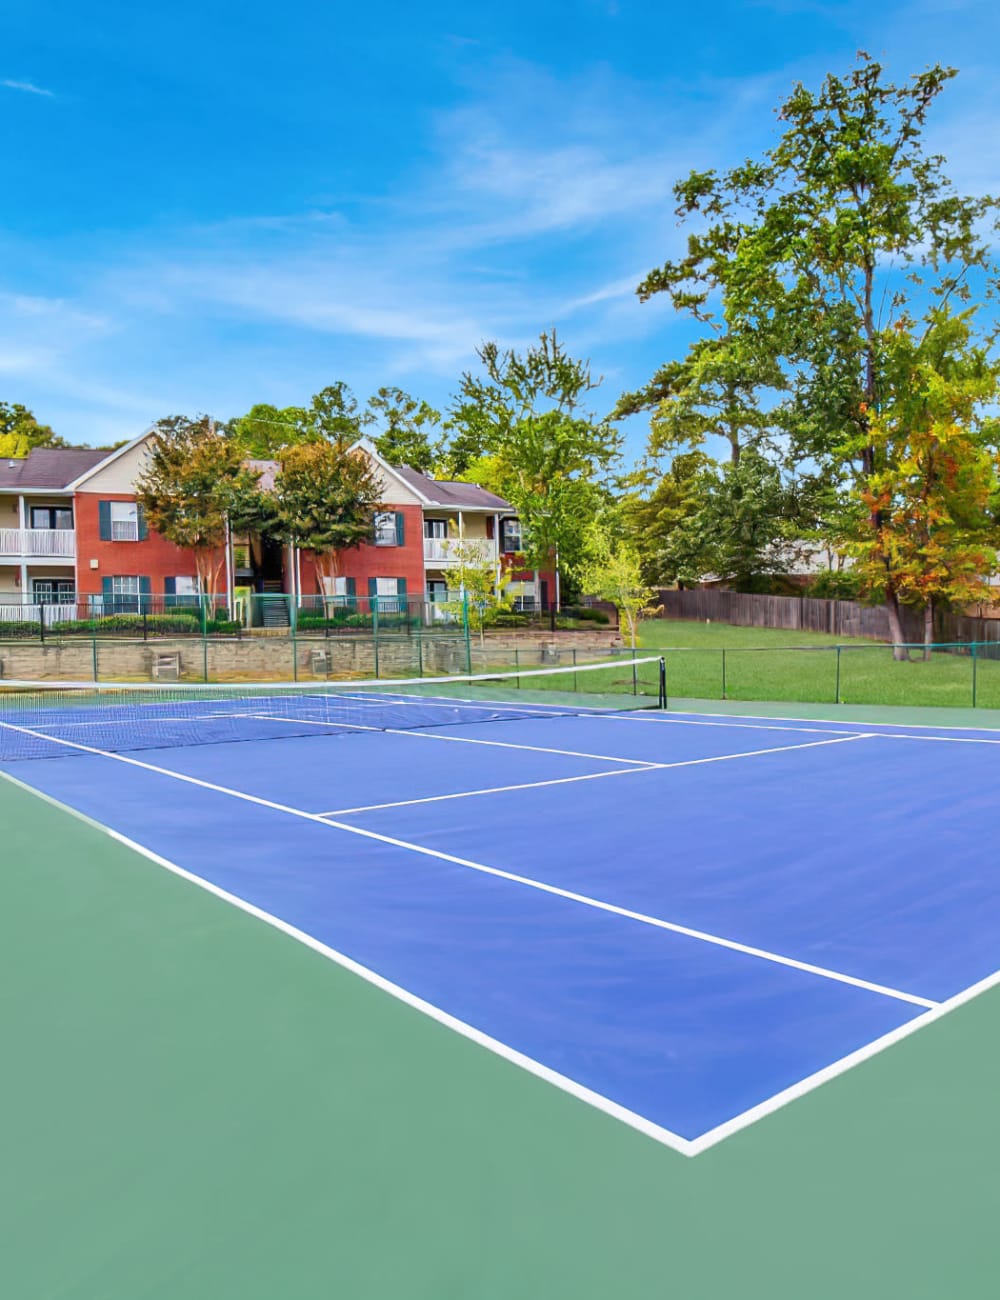 The onsite tennis court at The Gables in Ridgeland, Mississippi